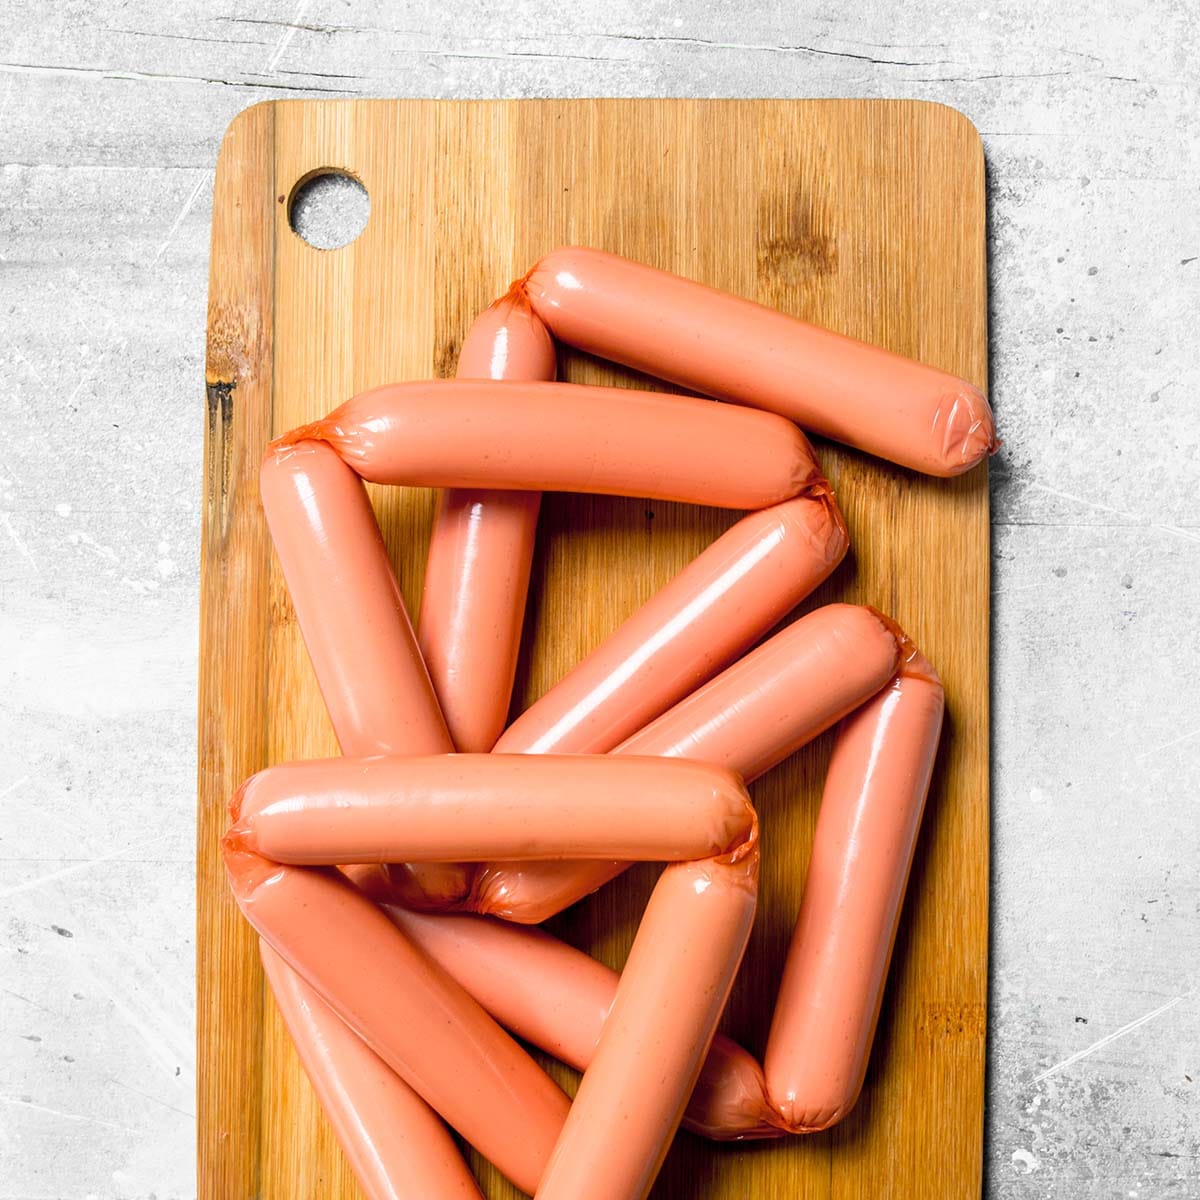 Can you refreeze hot dogs? Yes, you can refreeze hot dogs that have been thawed in the refrigerator. But the quality may deteriorate overtime.